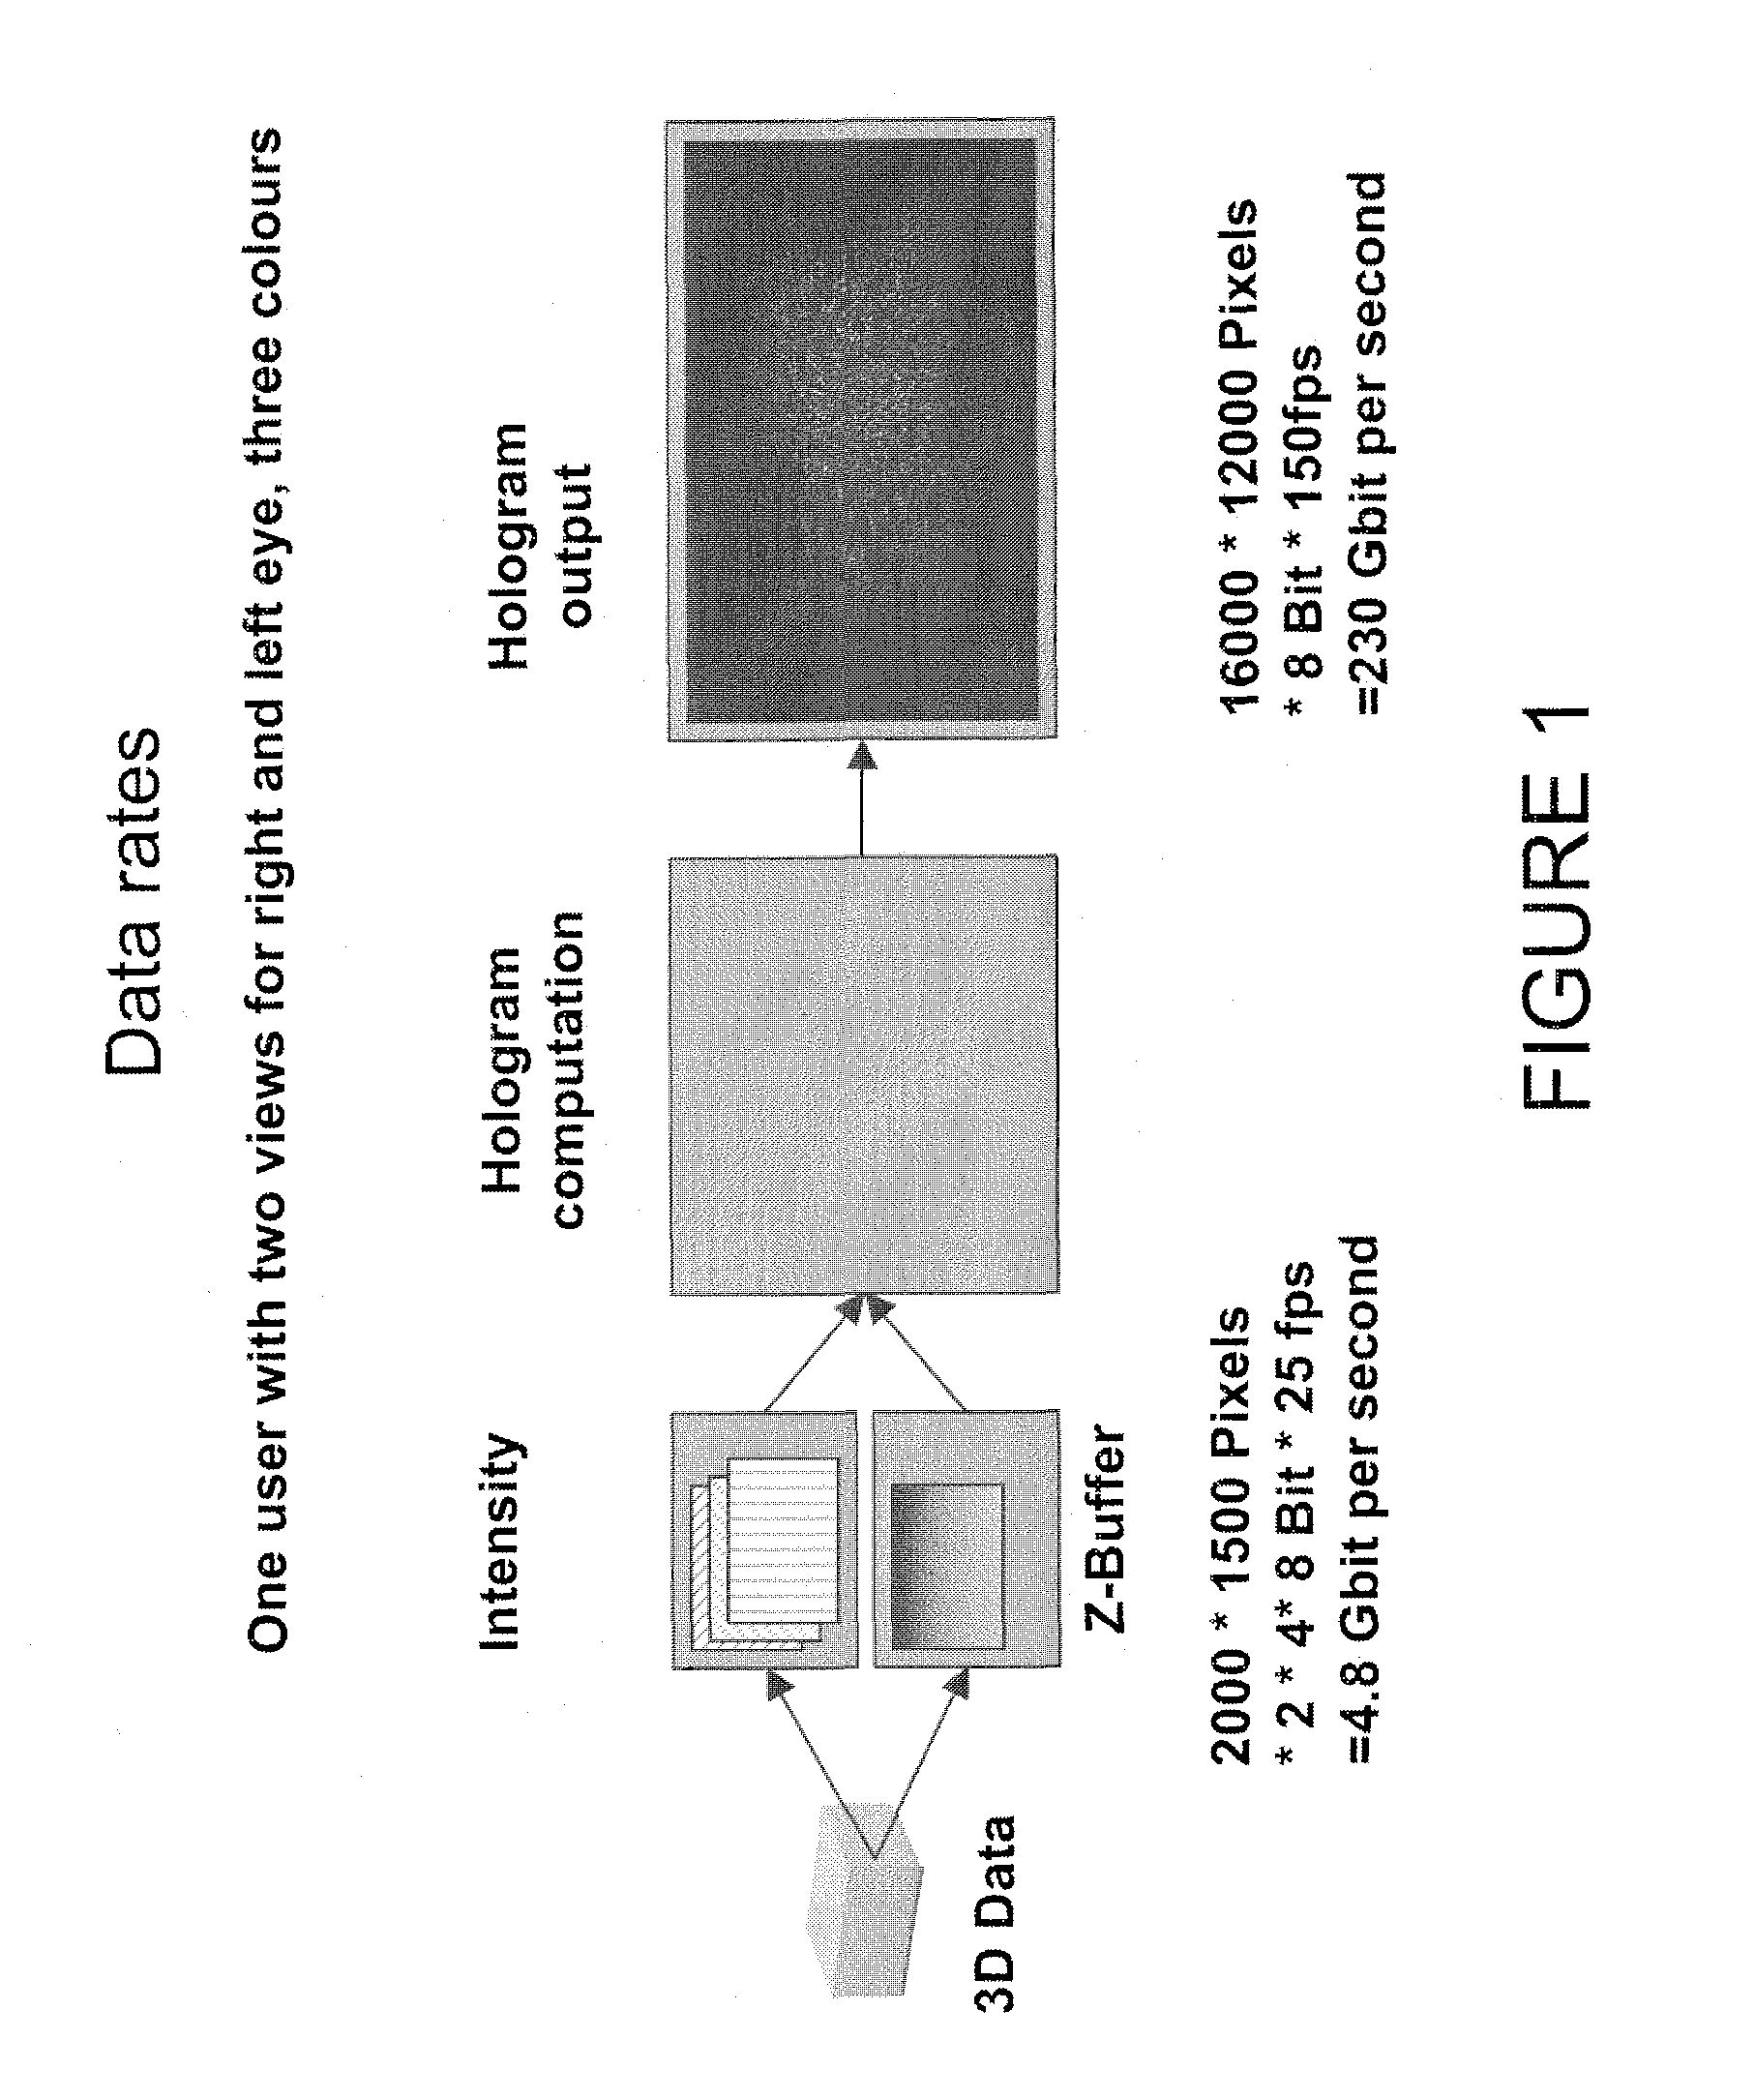 Holographic display with a variable beam deflection